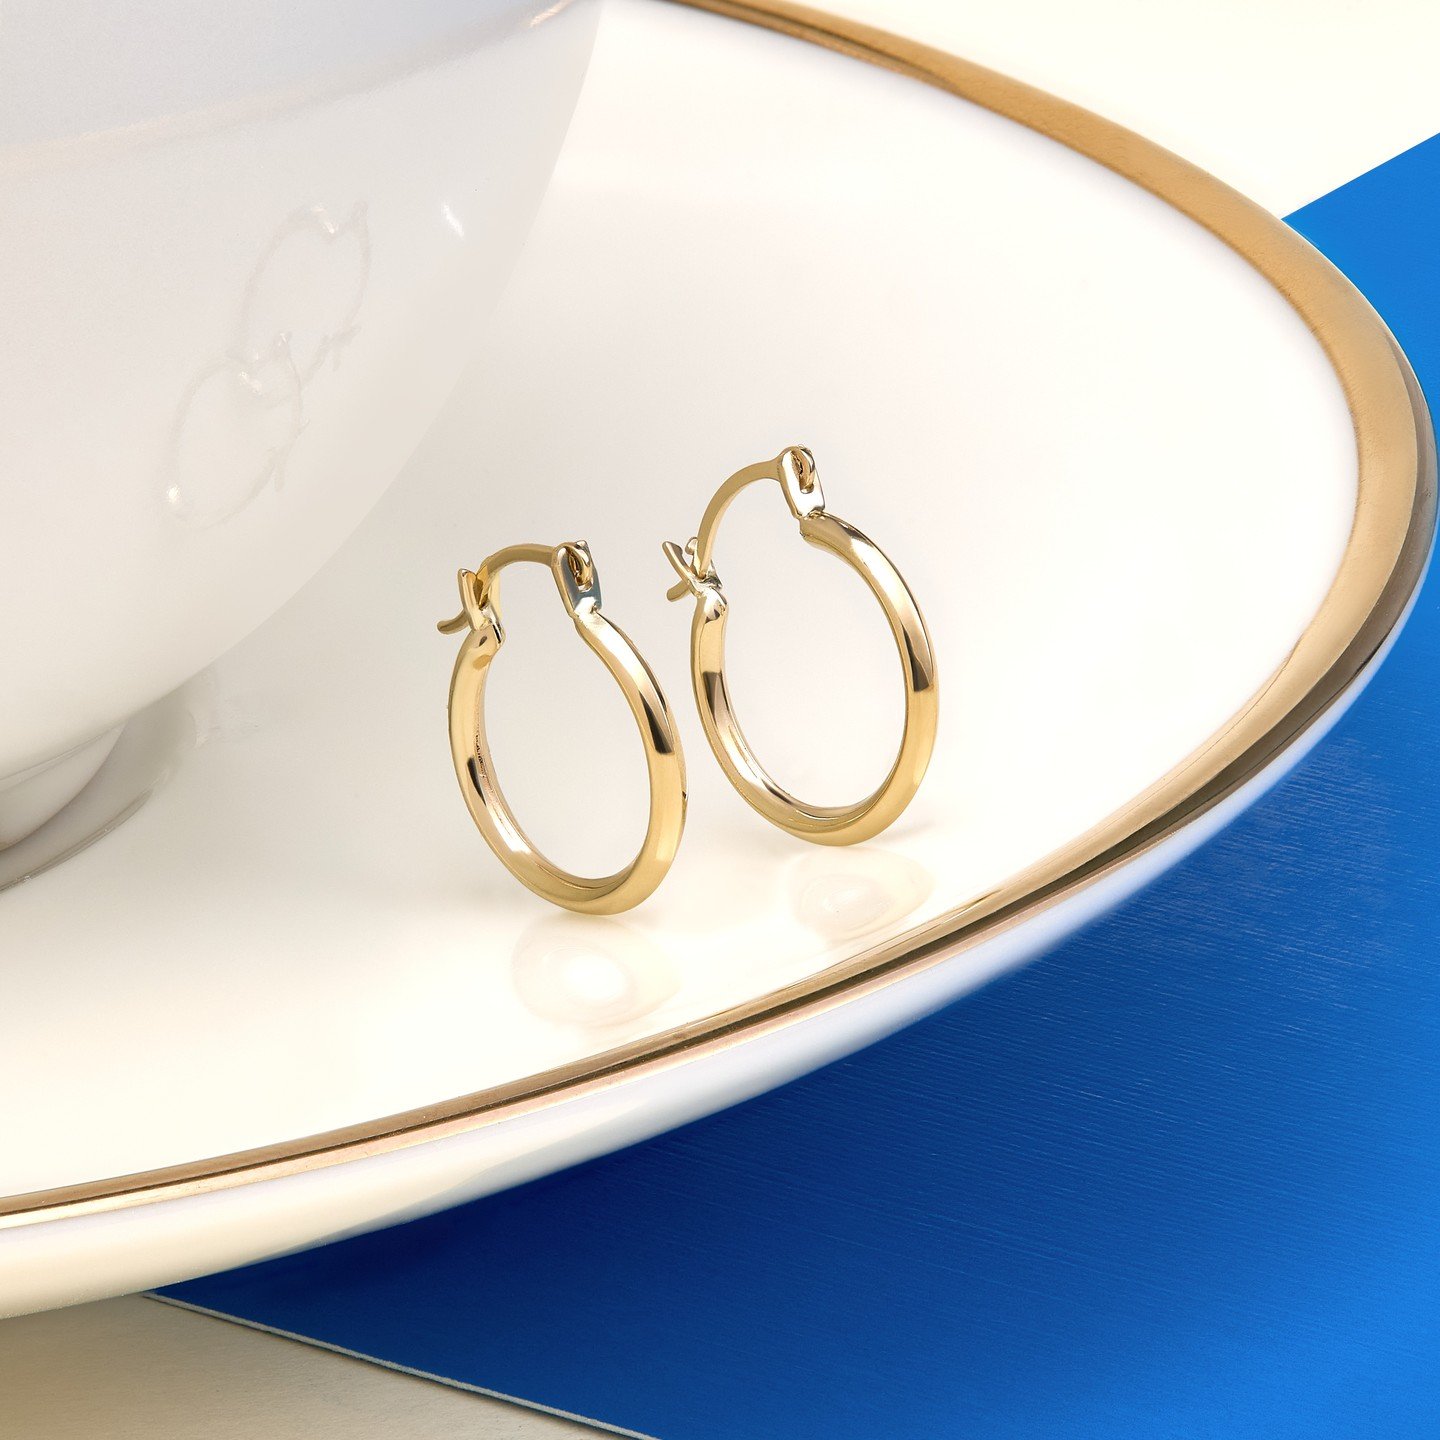 🤷&zwj;♀️ Why complicate things? These simple gold hoops are a go-to for adding a touch of glamour to any outfit. What do you think?
.
.
.
#mayisgoldmonth #MIGM #gold #fashion